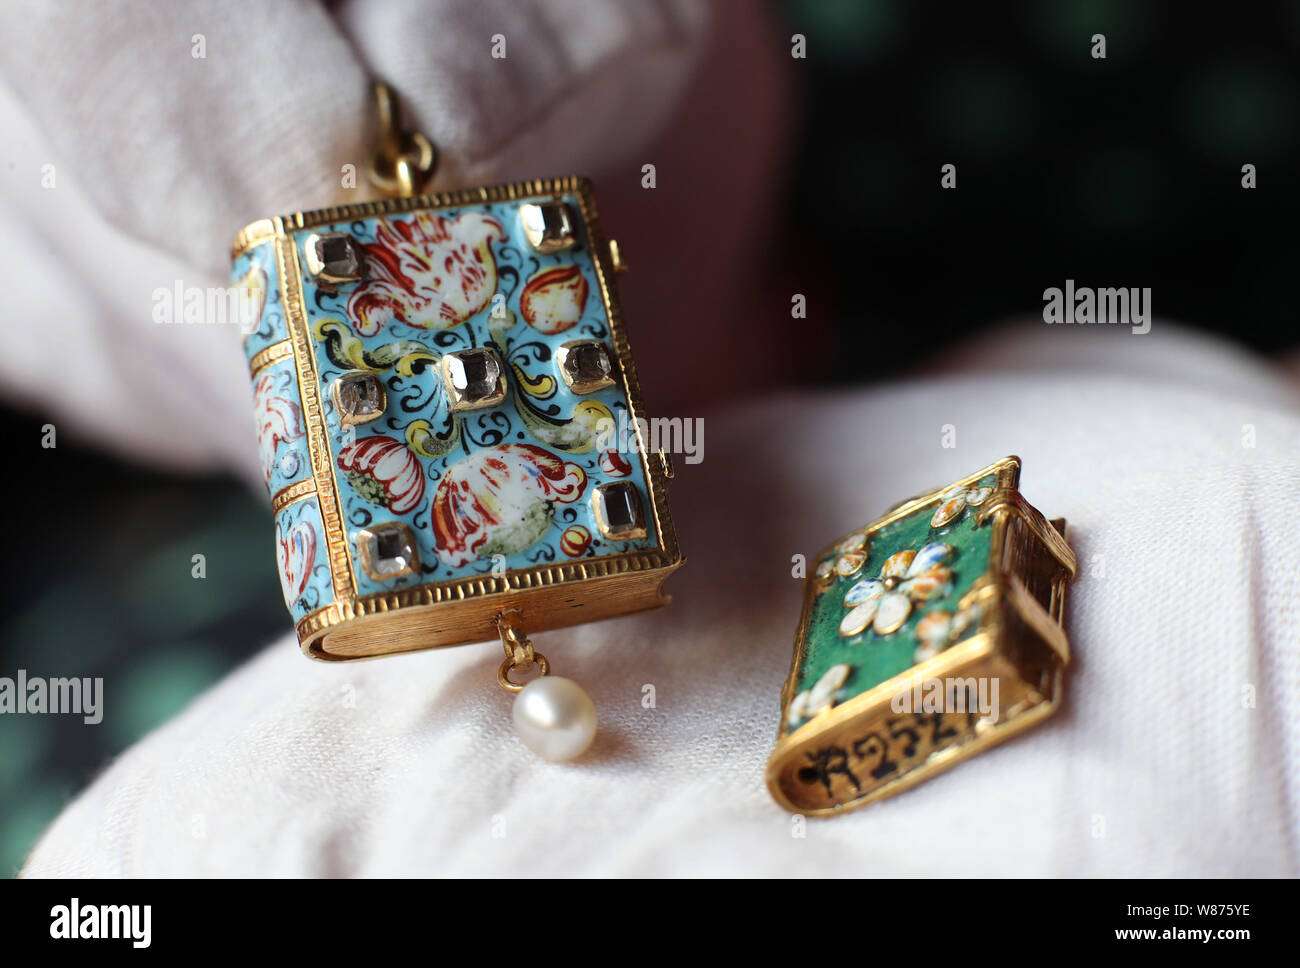 A couple of gold and enamel pendants (c.1640-1660) in the shape of books, with one (right) bearing a Nazi inventory number on the book edge, applied when they were confiscated from the French Rothschilds during the Second World War, at Waddesdon Manor, Buckinghamshire, ahead of the opening of A Rothschild Treasury exhibition, which will be held in a new, permanent, gallery containing more than 300 rarely seen objects spanning two millennia - from a 1st-century cameo of Augustus Caesar's grandson, via jewellery given as presents from Queen Victoria, to objects bearing Nazi inventory numbers. Stock Photo